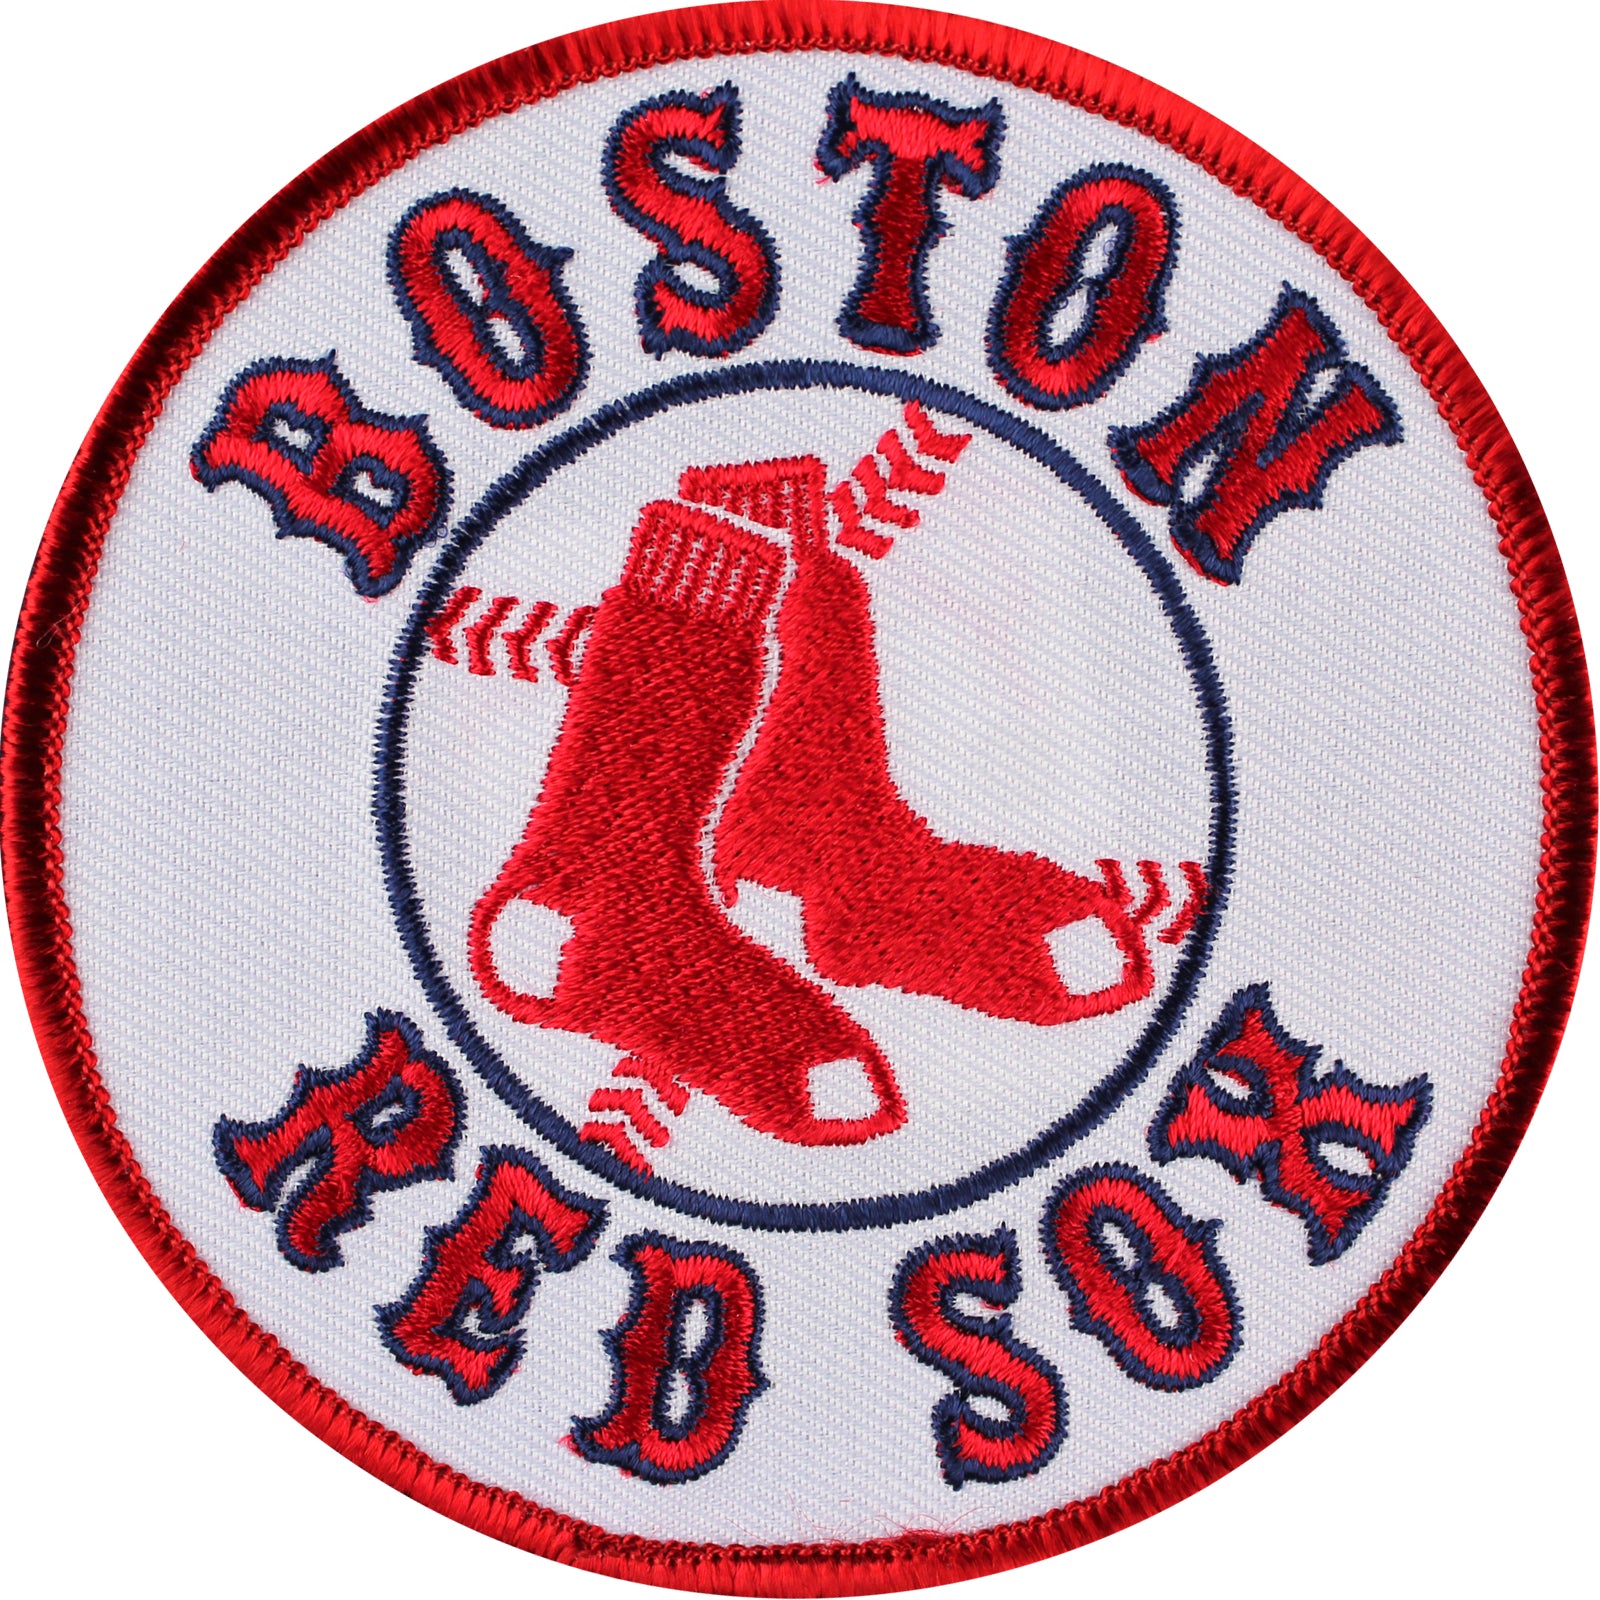 red sox 2 on sleeve